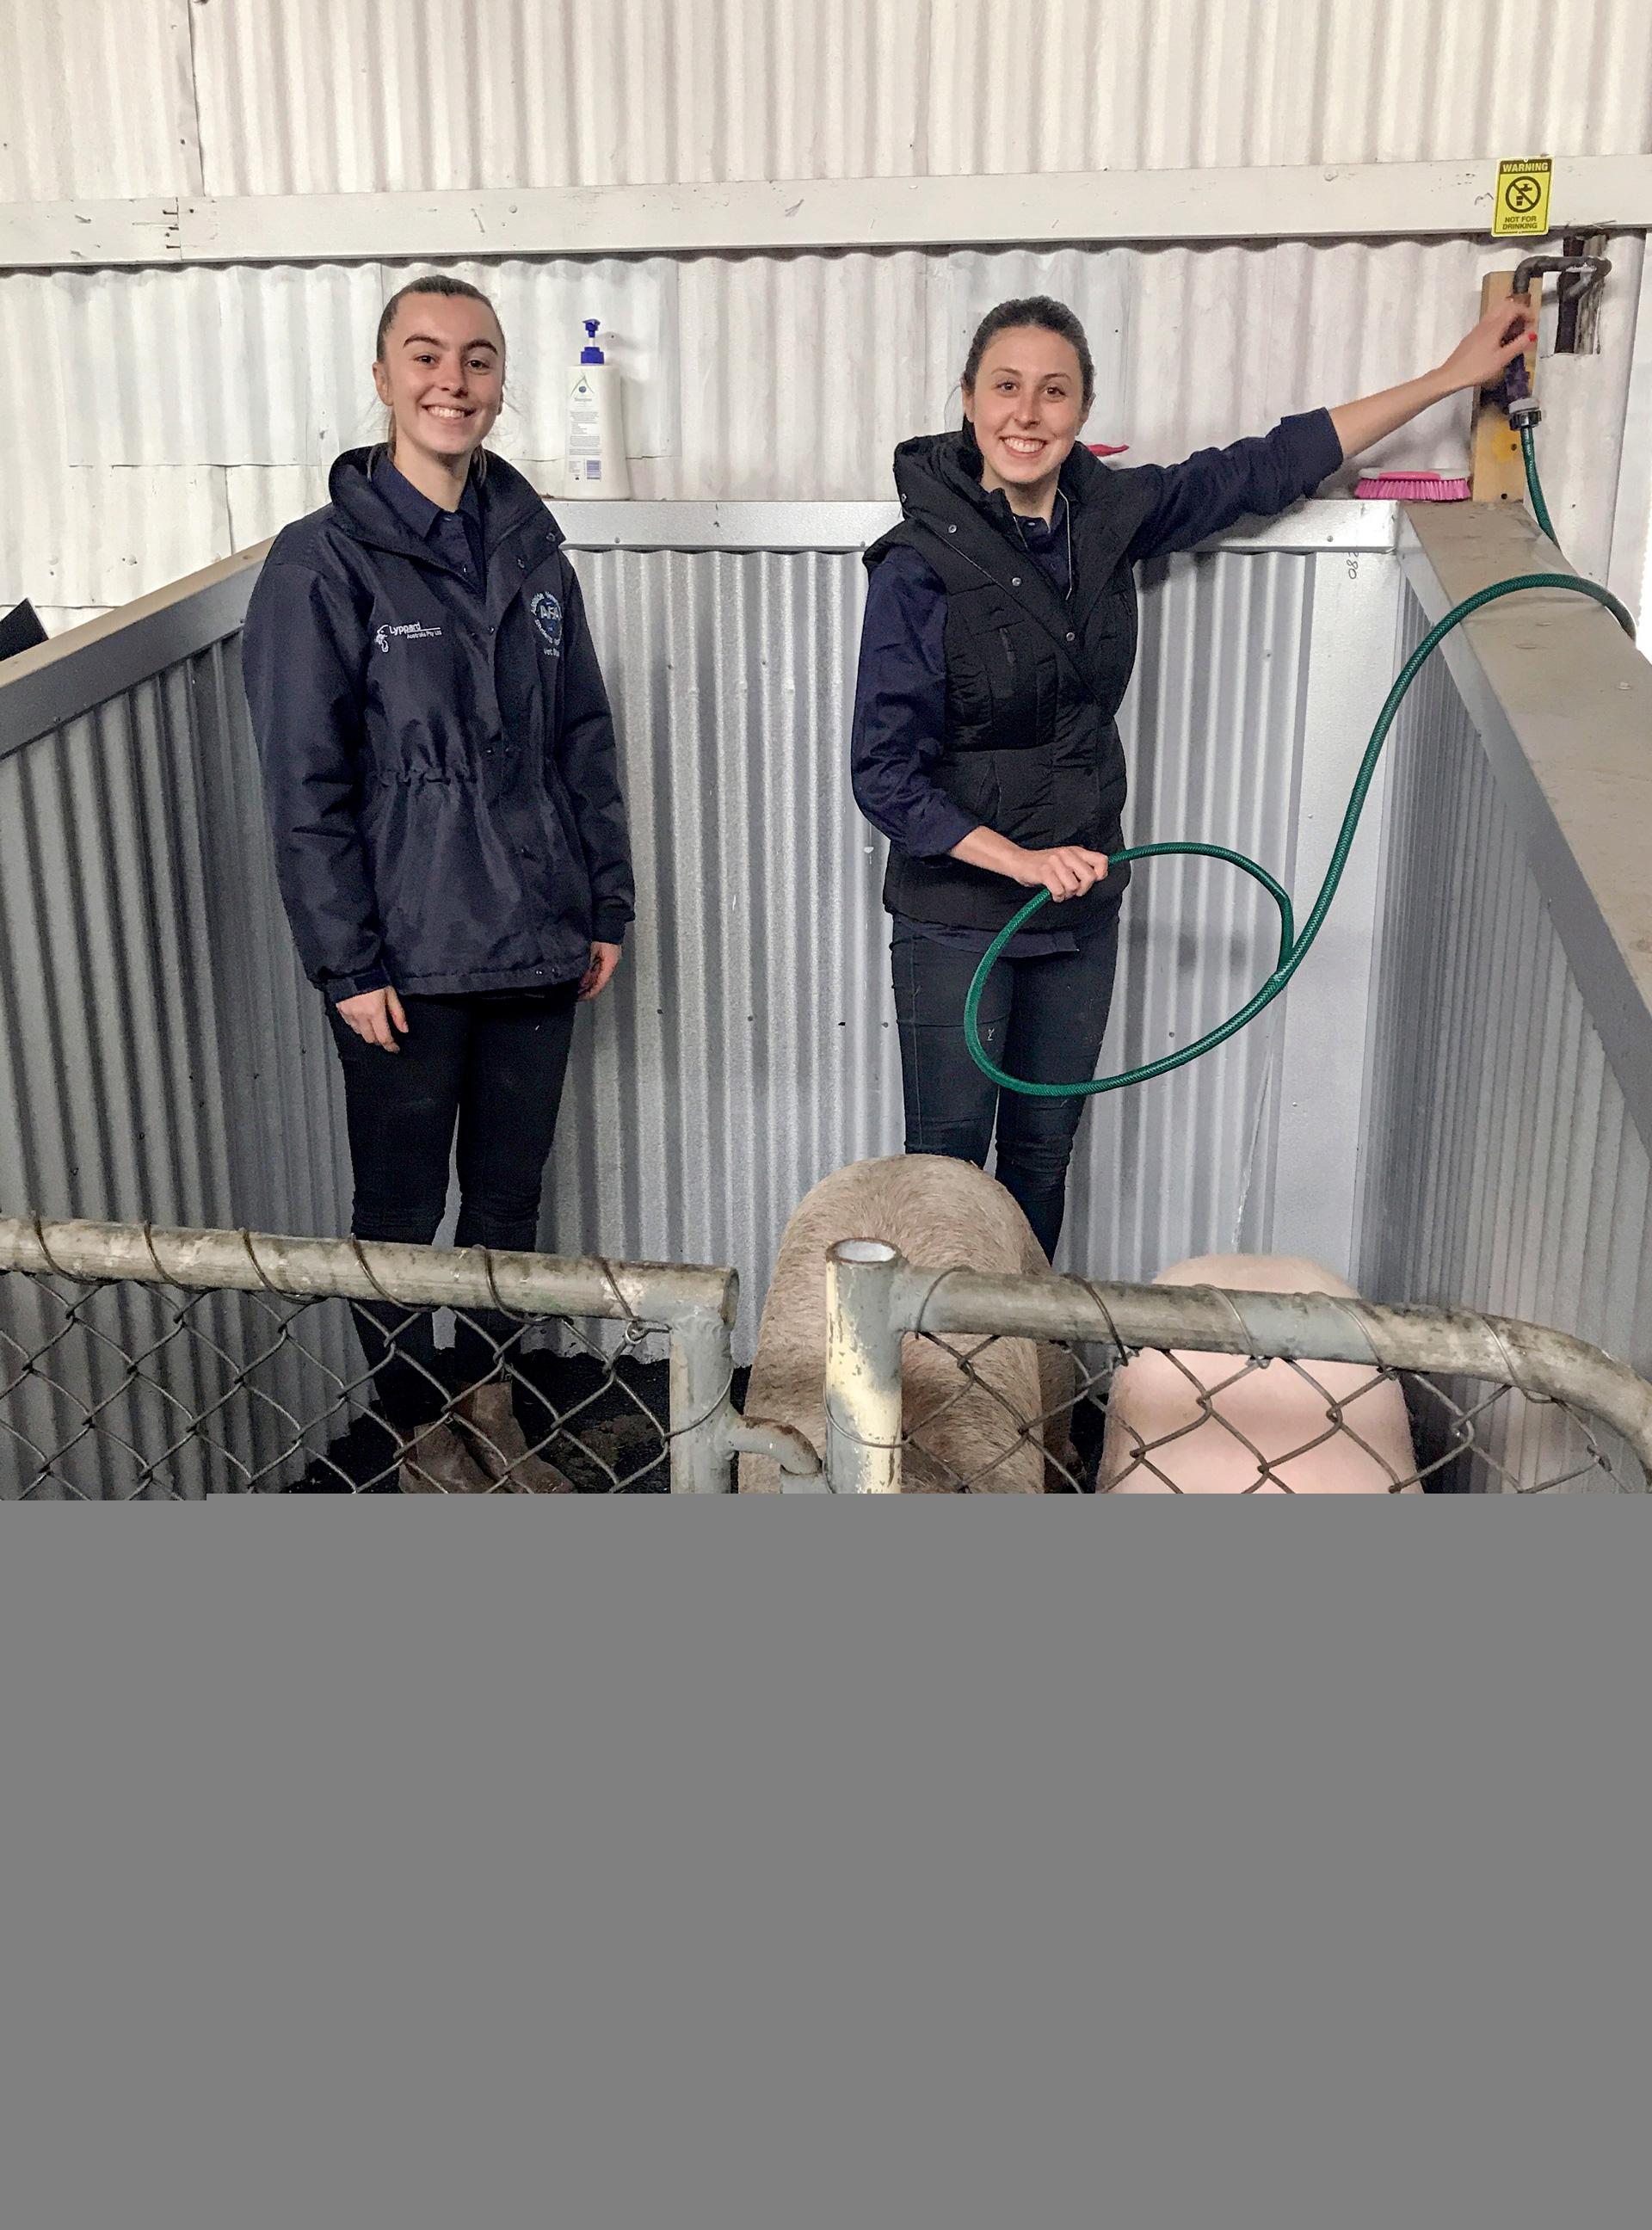 School of Animal and Veterinary Sciences students Alex Bucci and Claudia Rigney at the Royal Adelaide Show